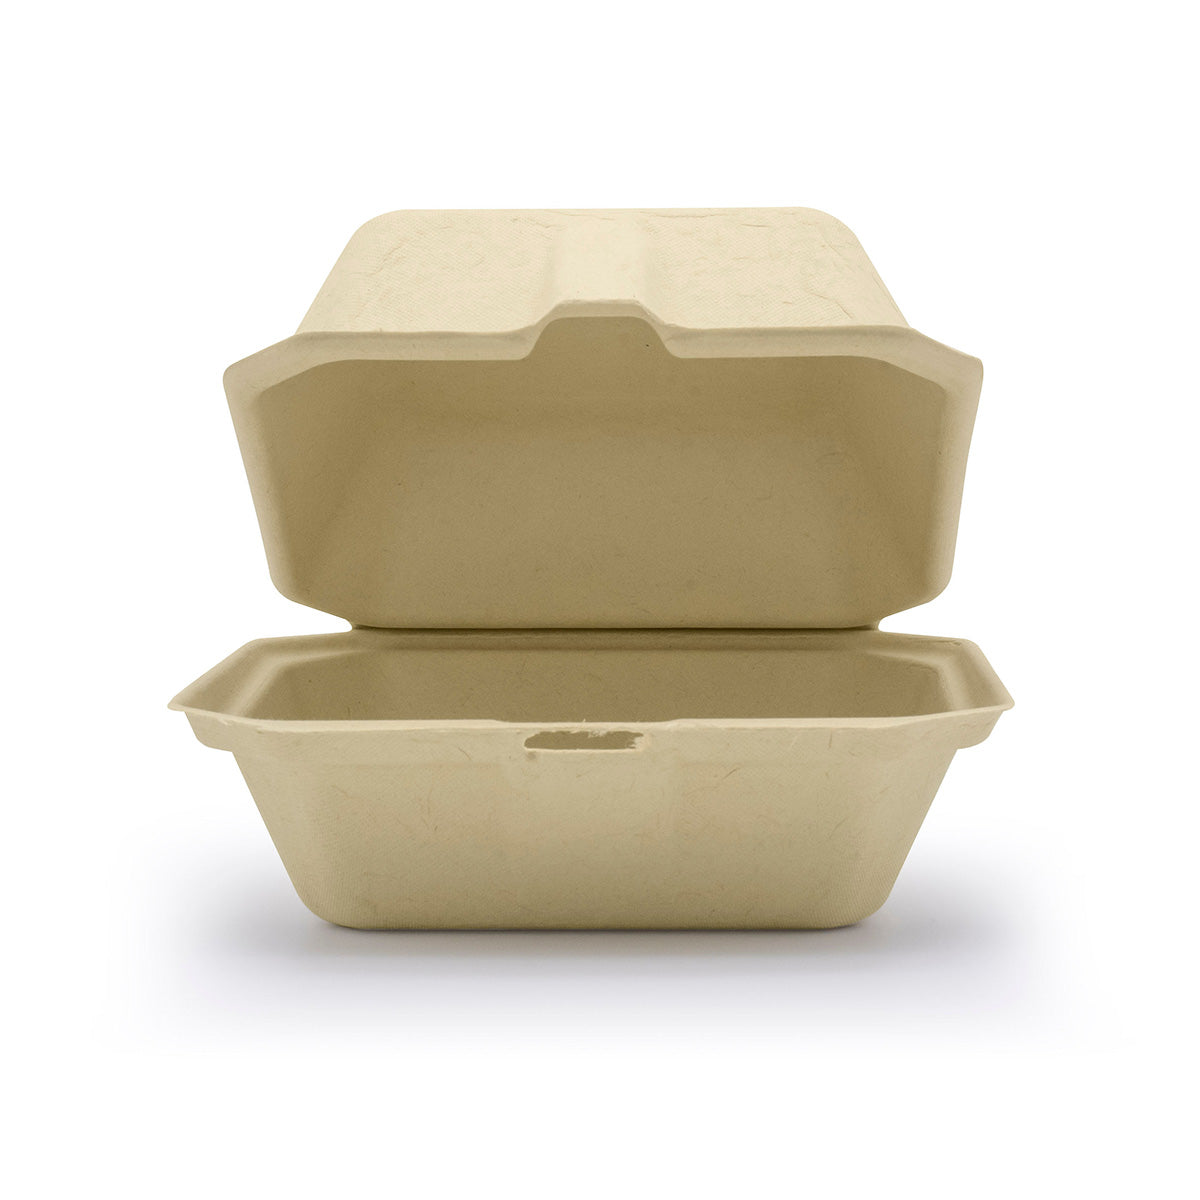 6 Solo Bare Sugarcane Biodegradable Take Out Container Hinged Clamshell,  Compostable, Ivory EcoFriendly